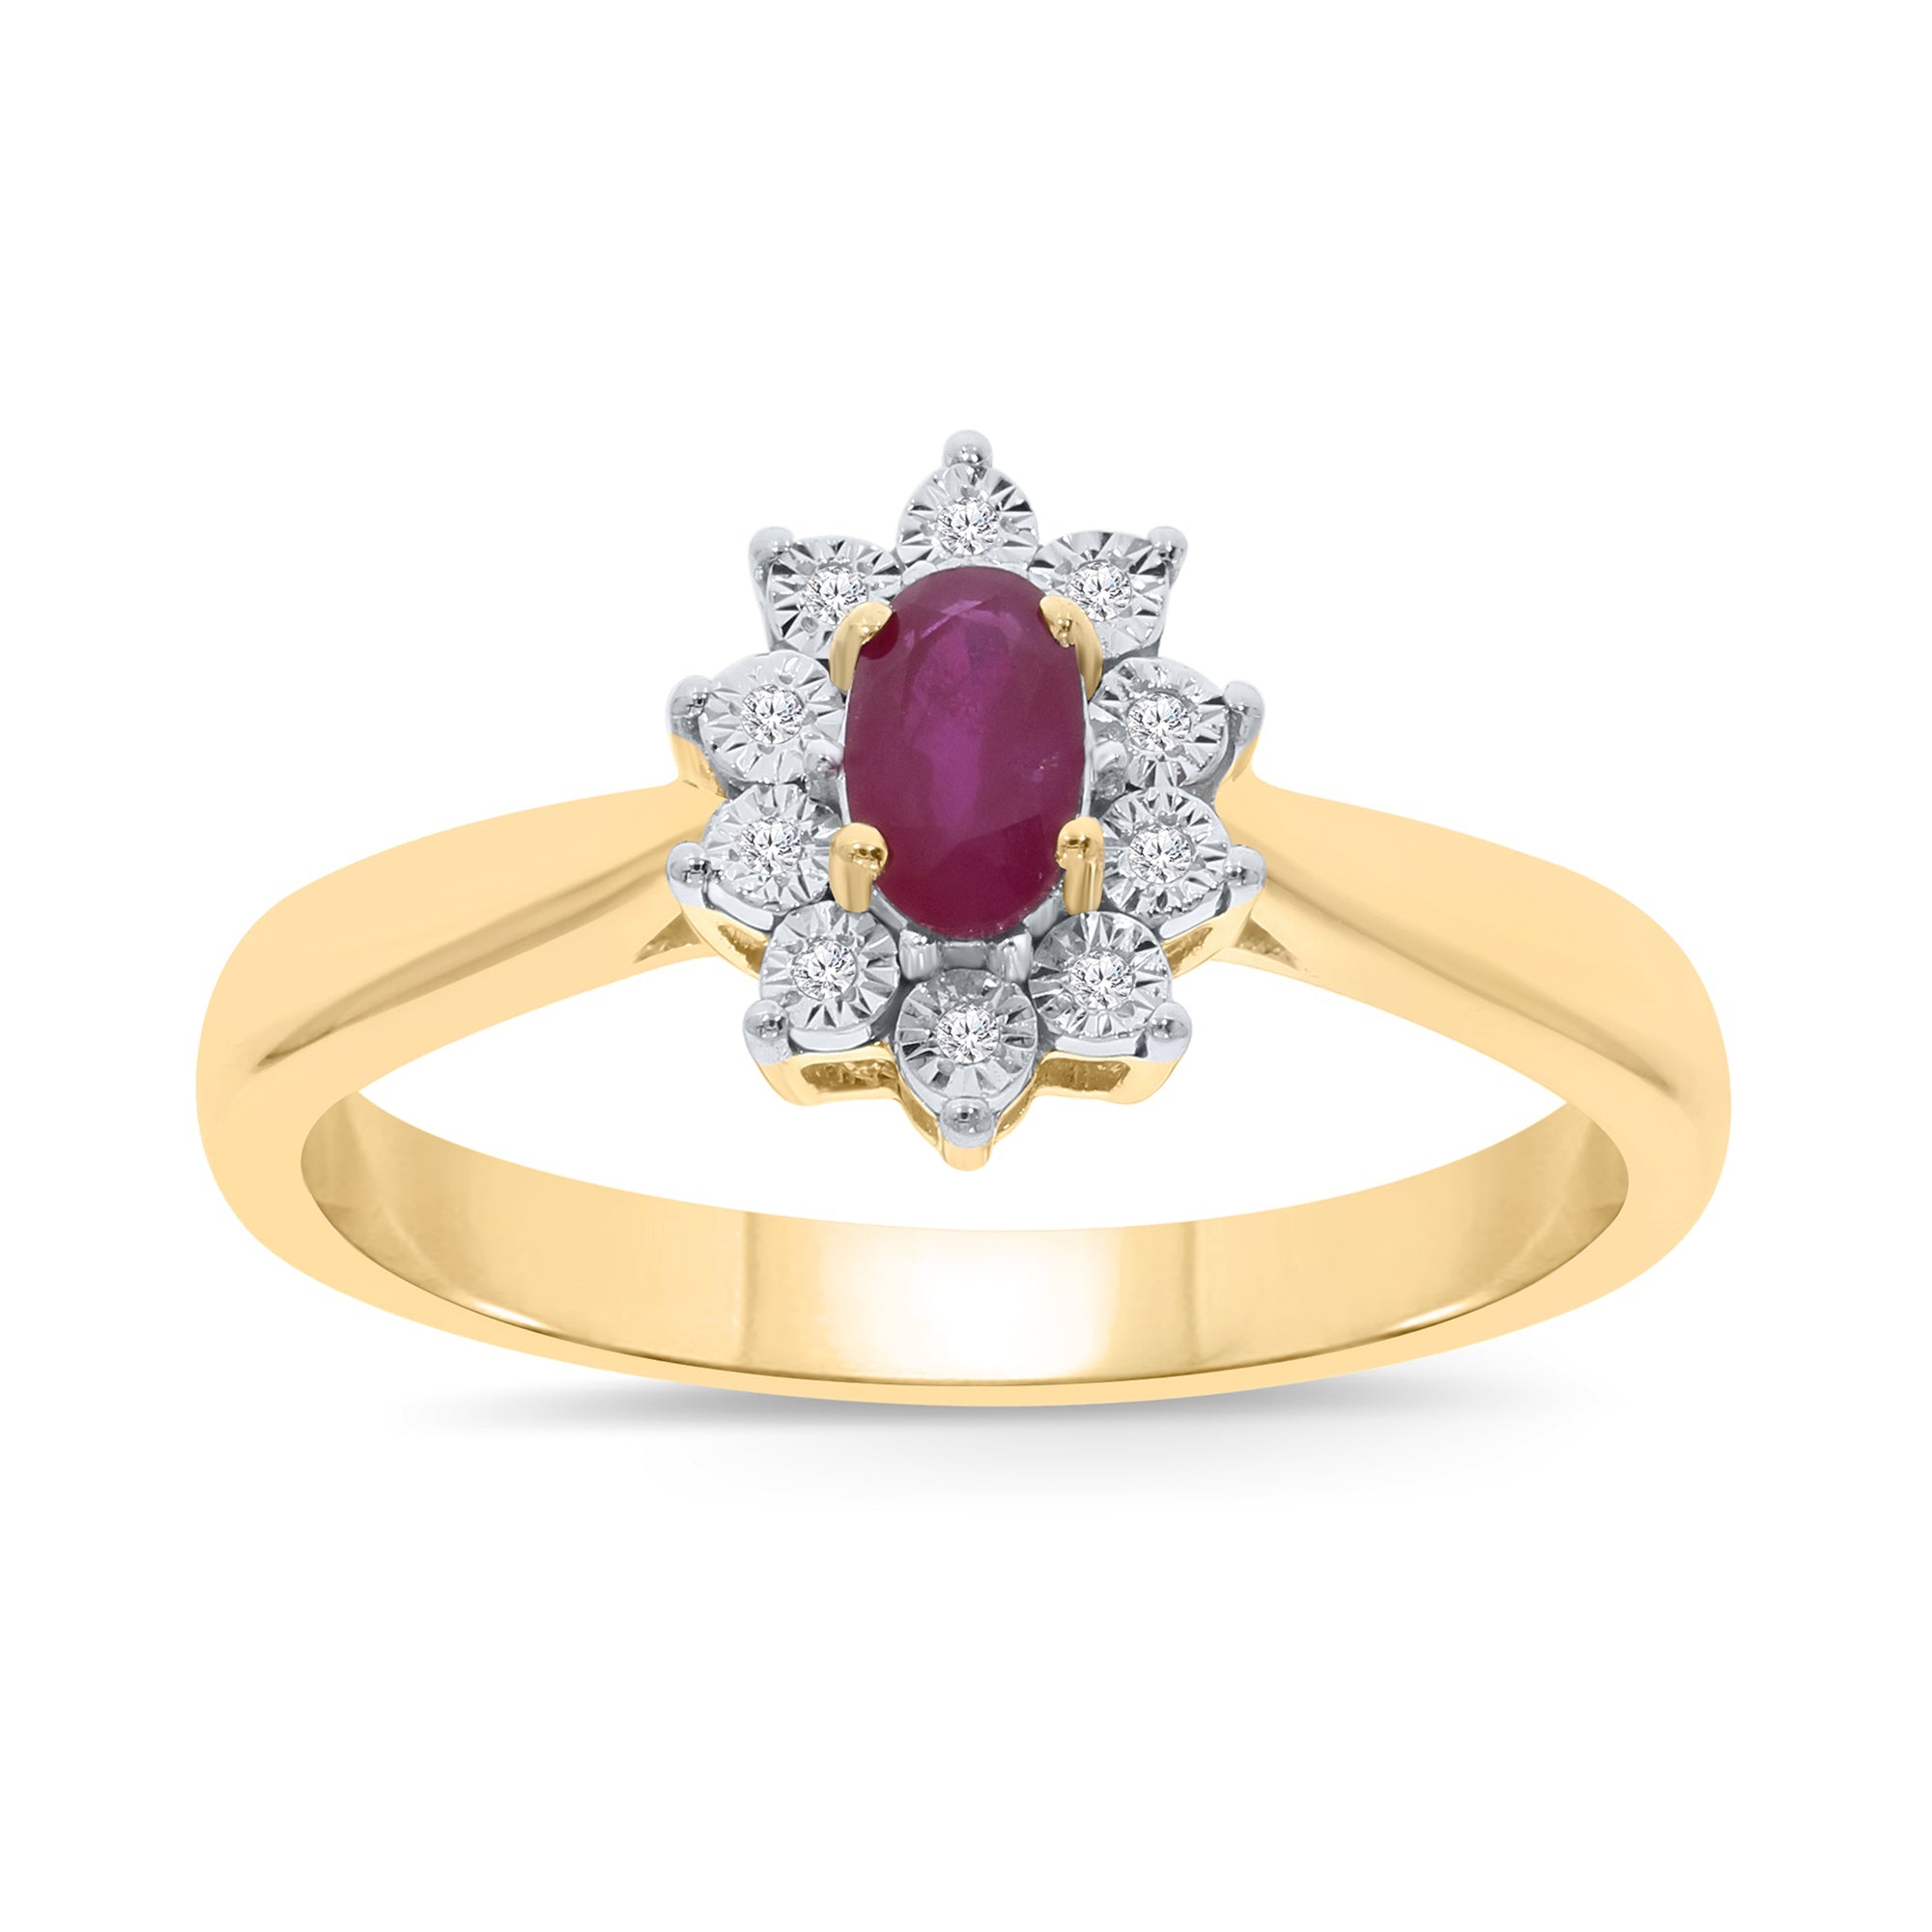 9ct gold 5x3mm oval ruby & miracle plate diamond cluster ring 0.03ct